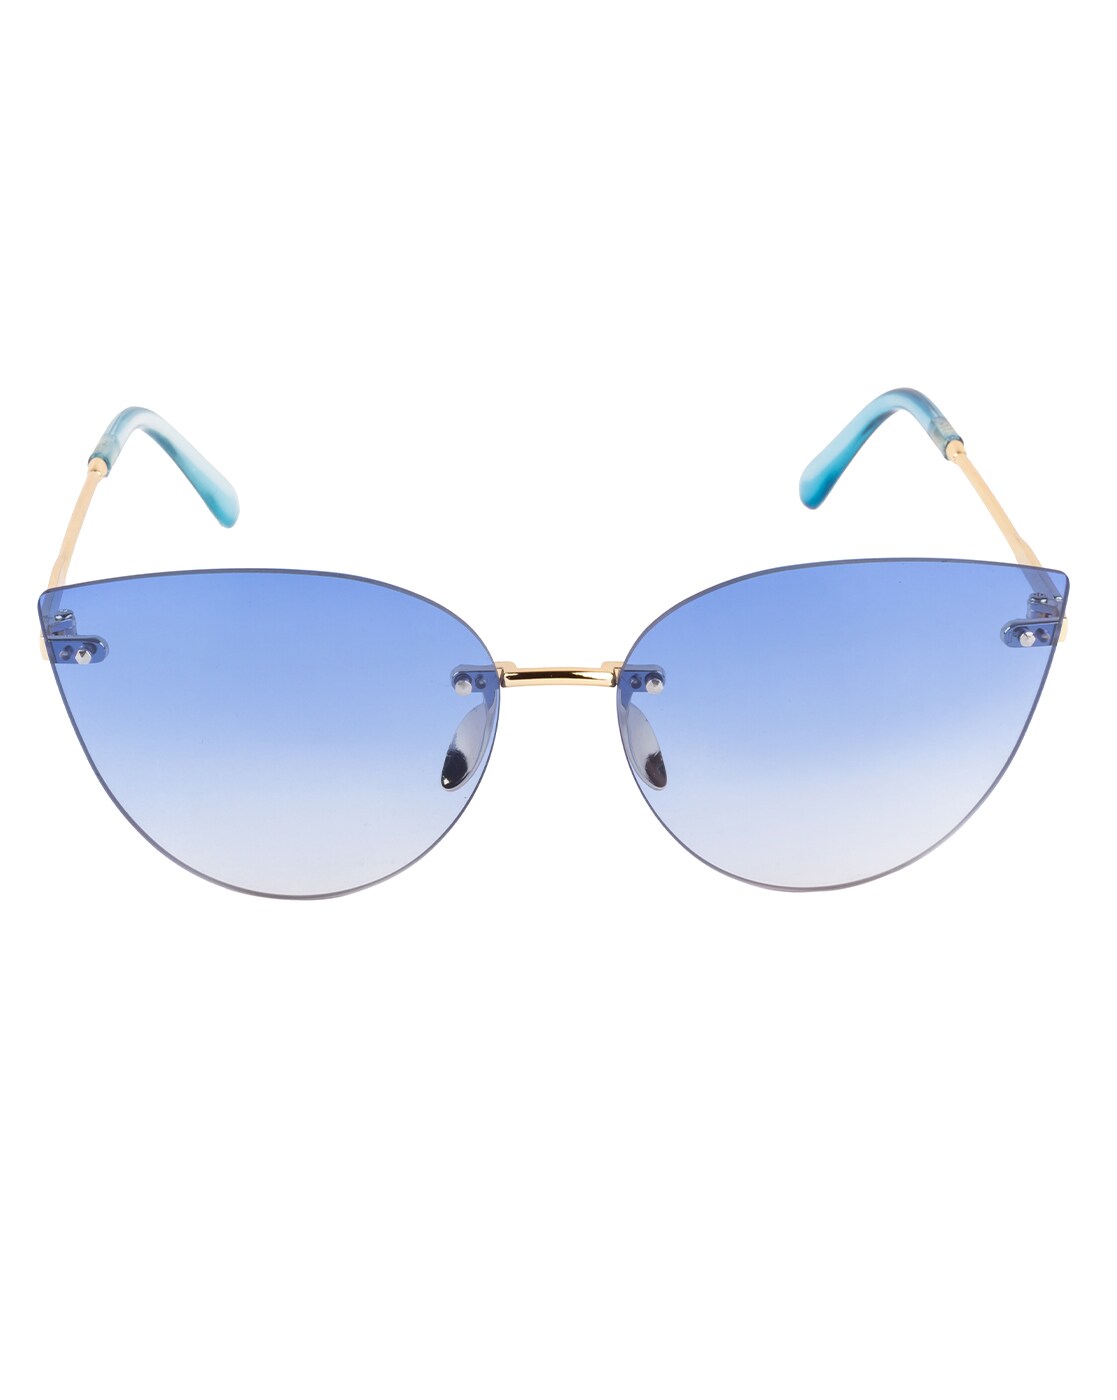 Stylish Cat Eye Blue Lens Glasses Price Cycling Sunglasses For Women And  Men Perfect For Summer, Driving, Riding And Windy Weather Big Frame  Rectangle Available In From Funny6631, $3.93